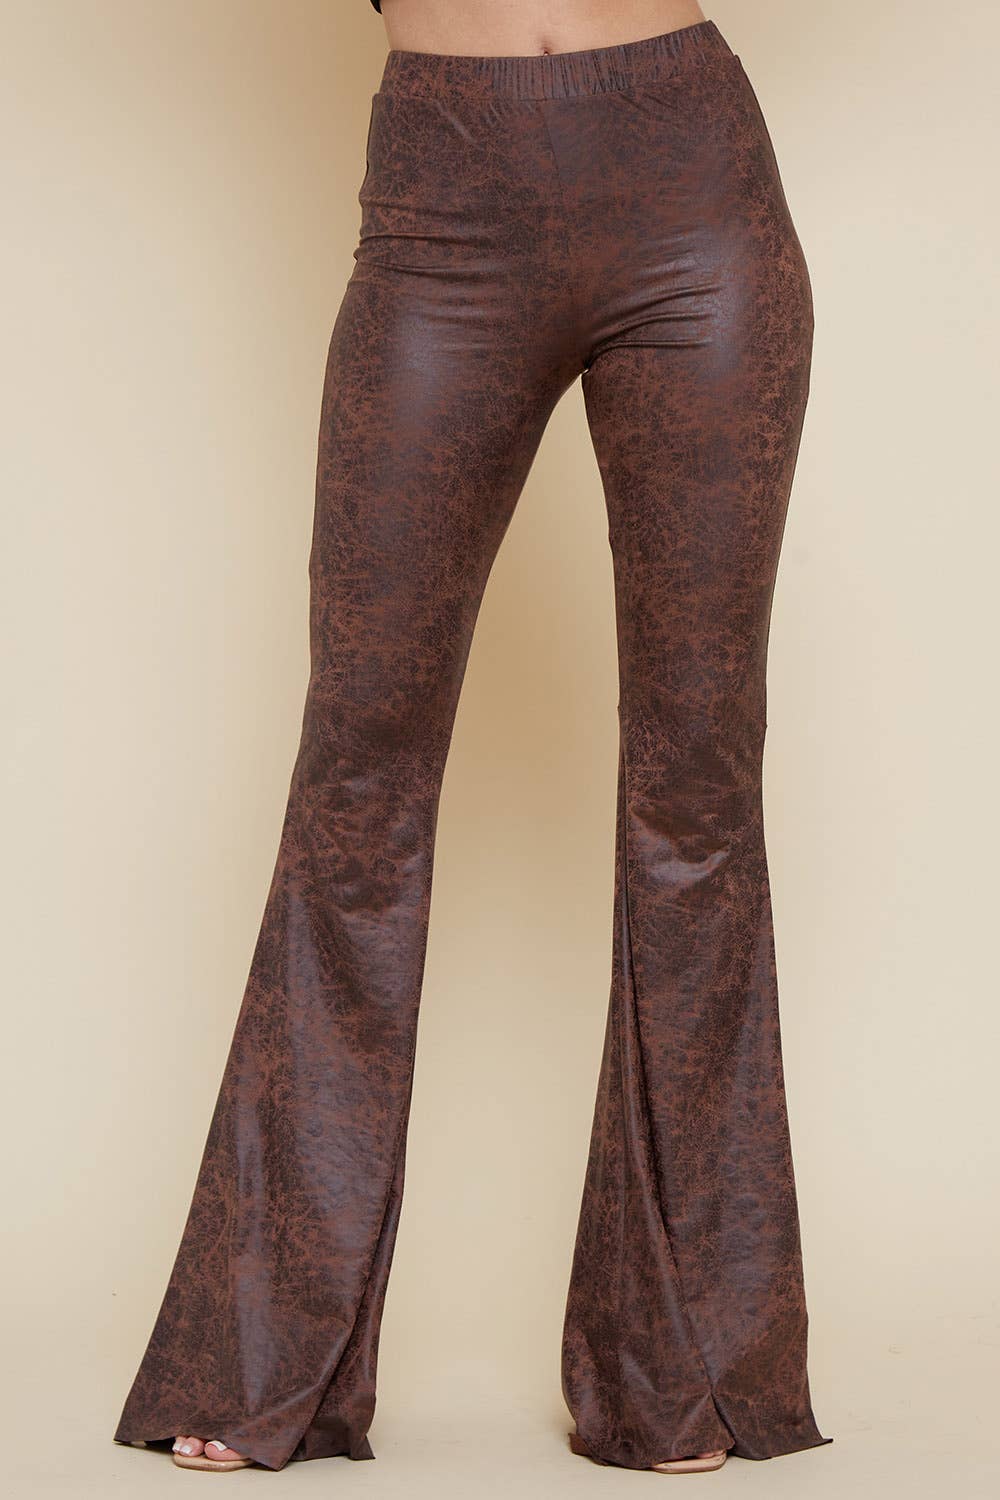 WISTERIA LANE - FAUX LEATHER LOOK KNIT FLARES - W2300PK BROWN (7816410169571)